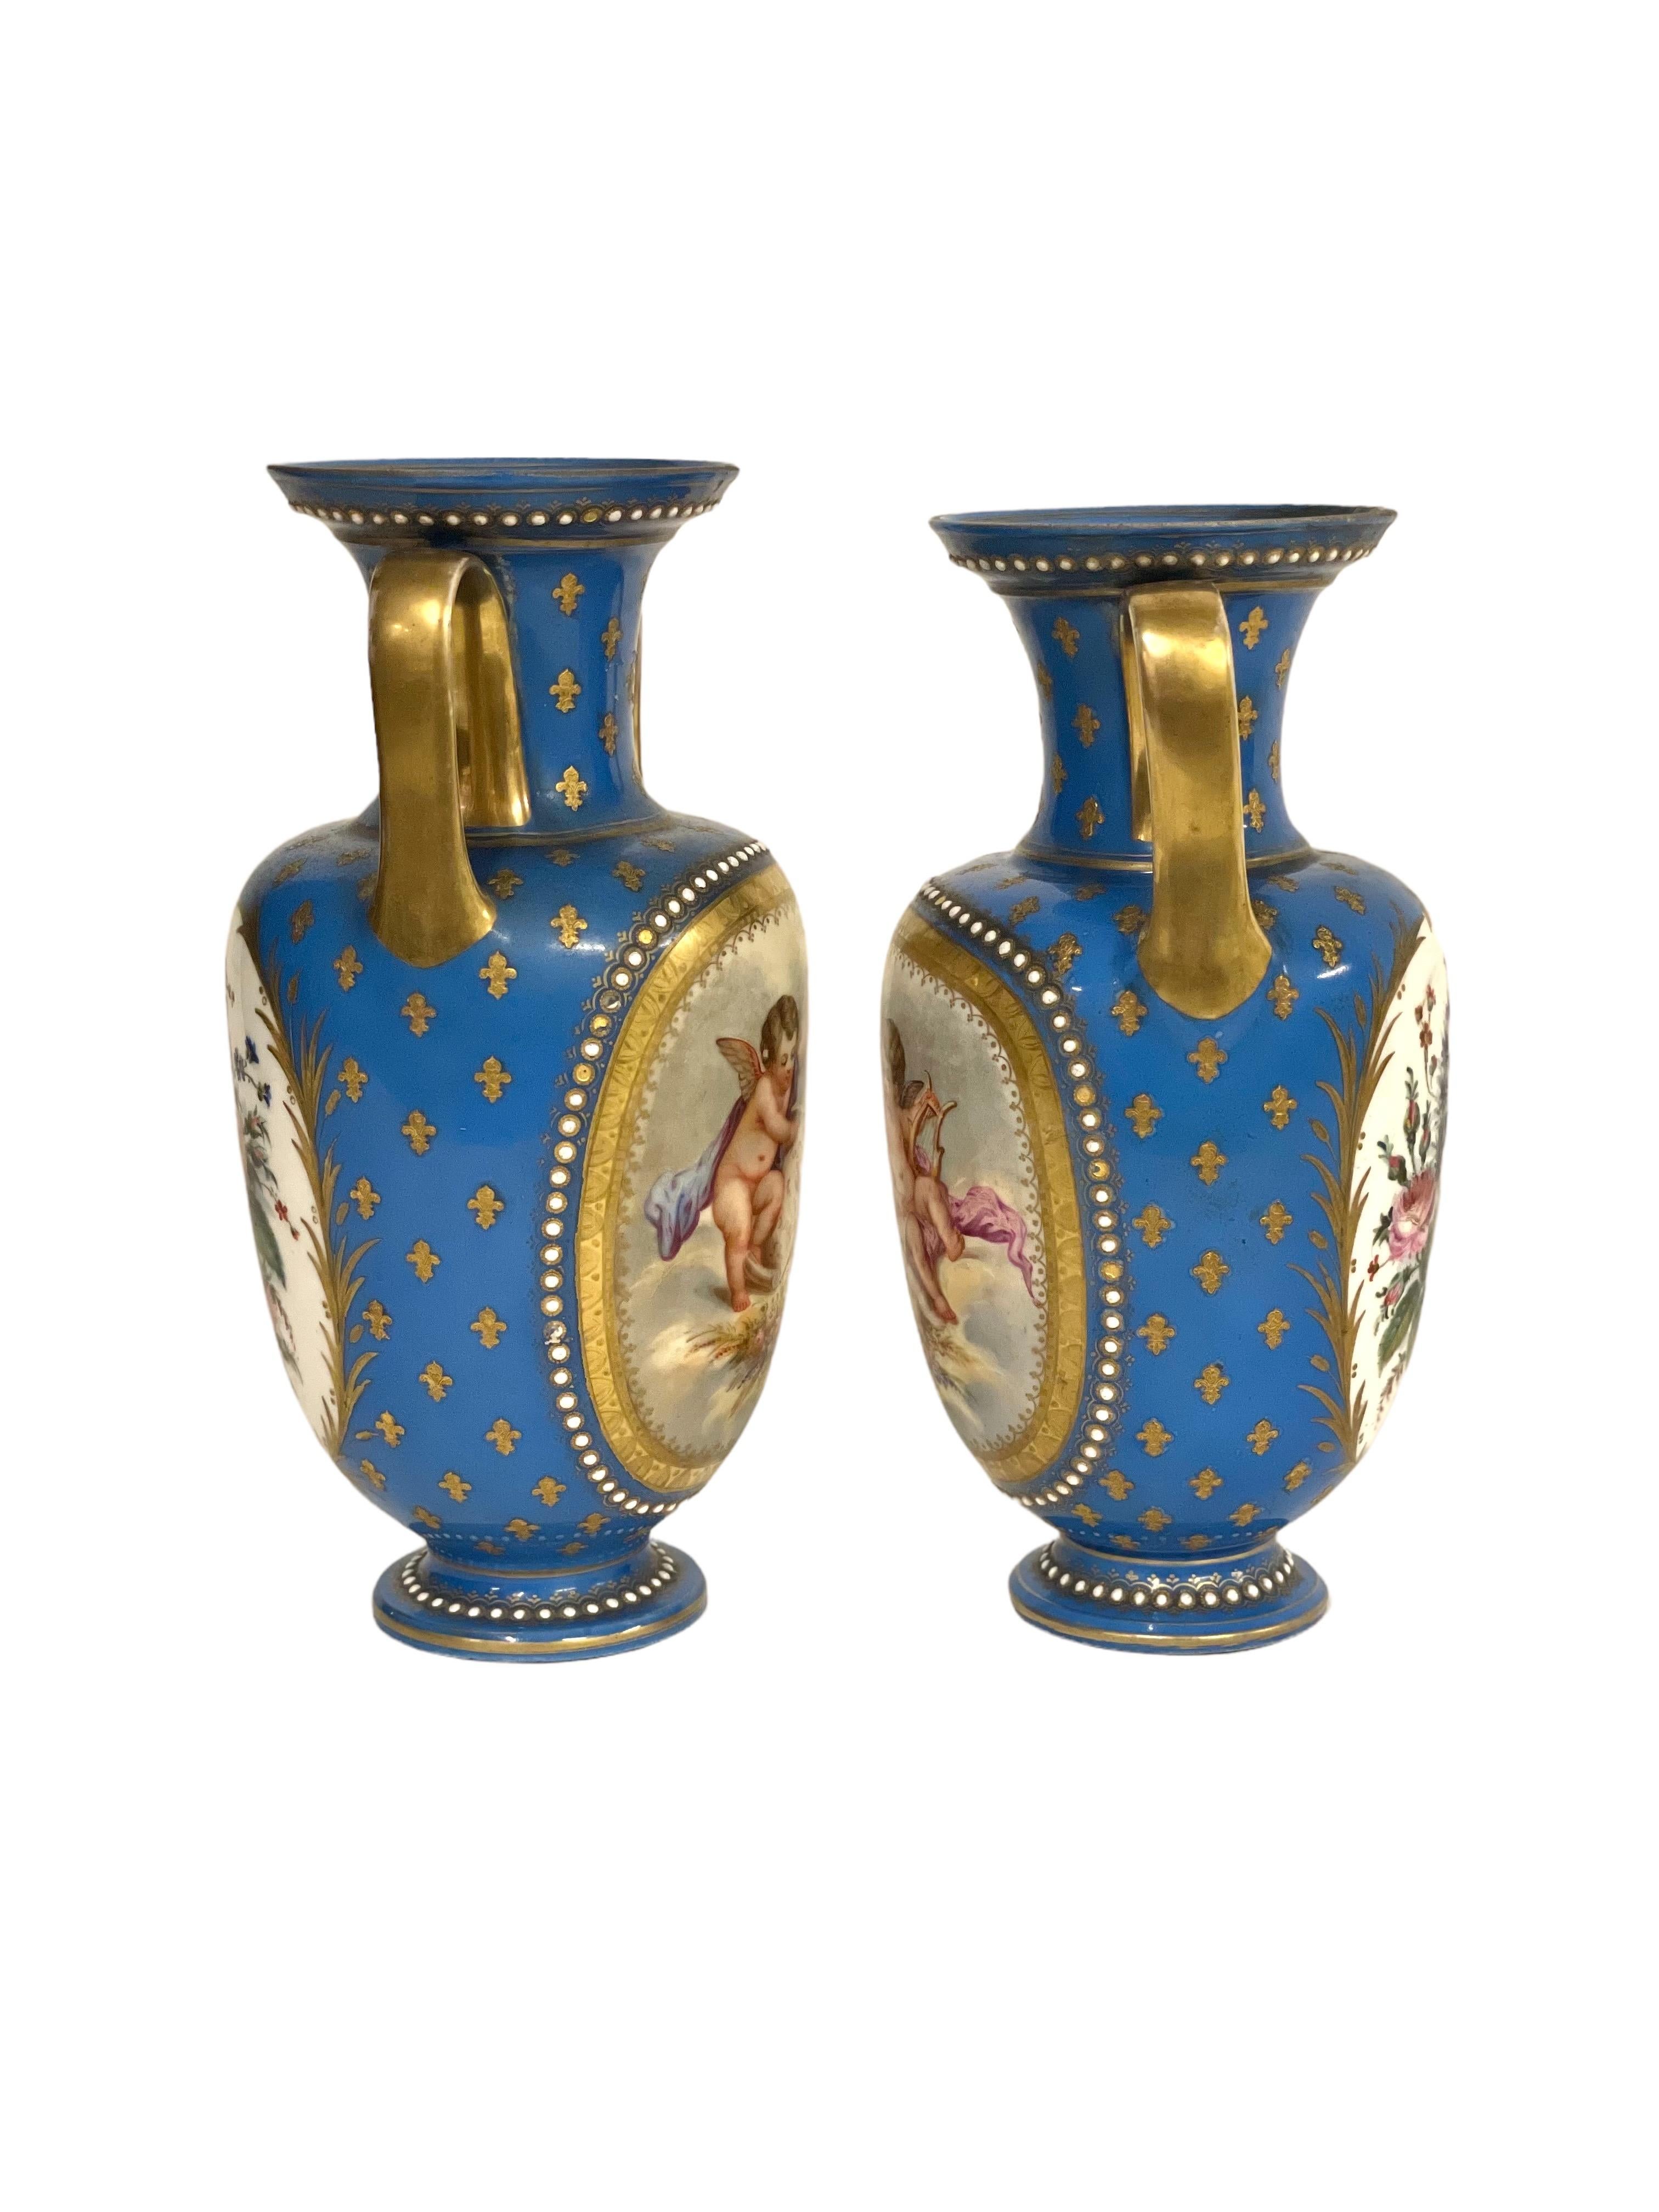 French Sèvres Pair of Gilded and Blue Porcelain Vases, 19th Century